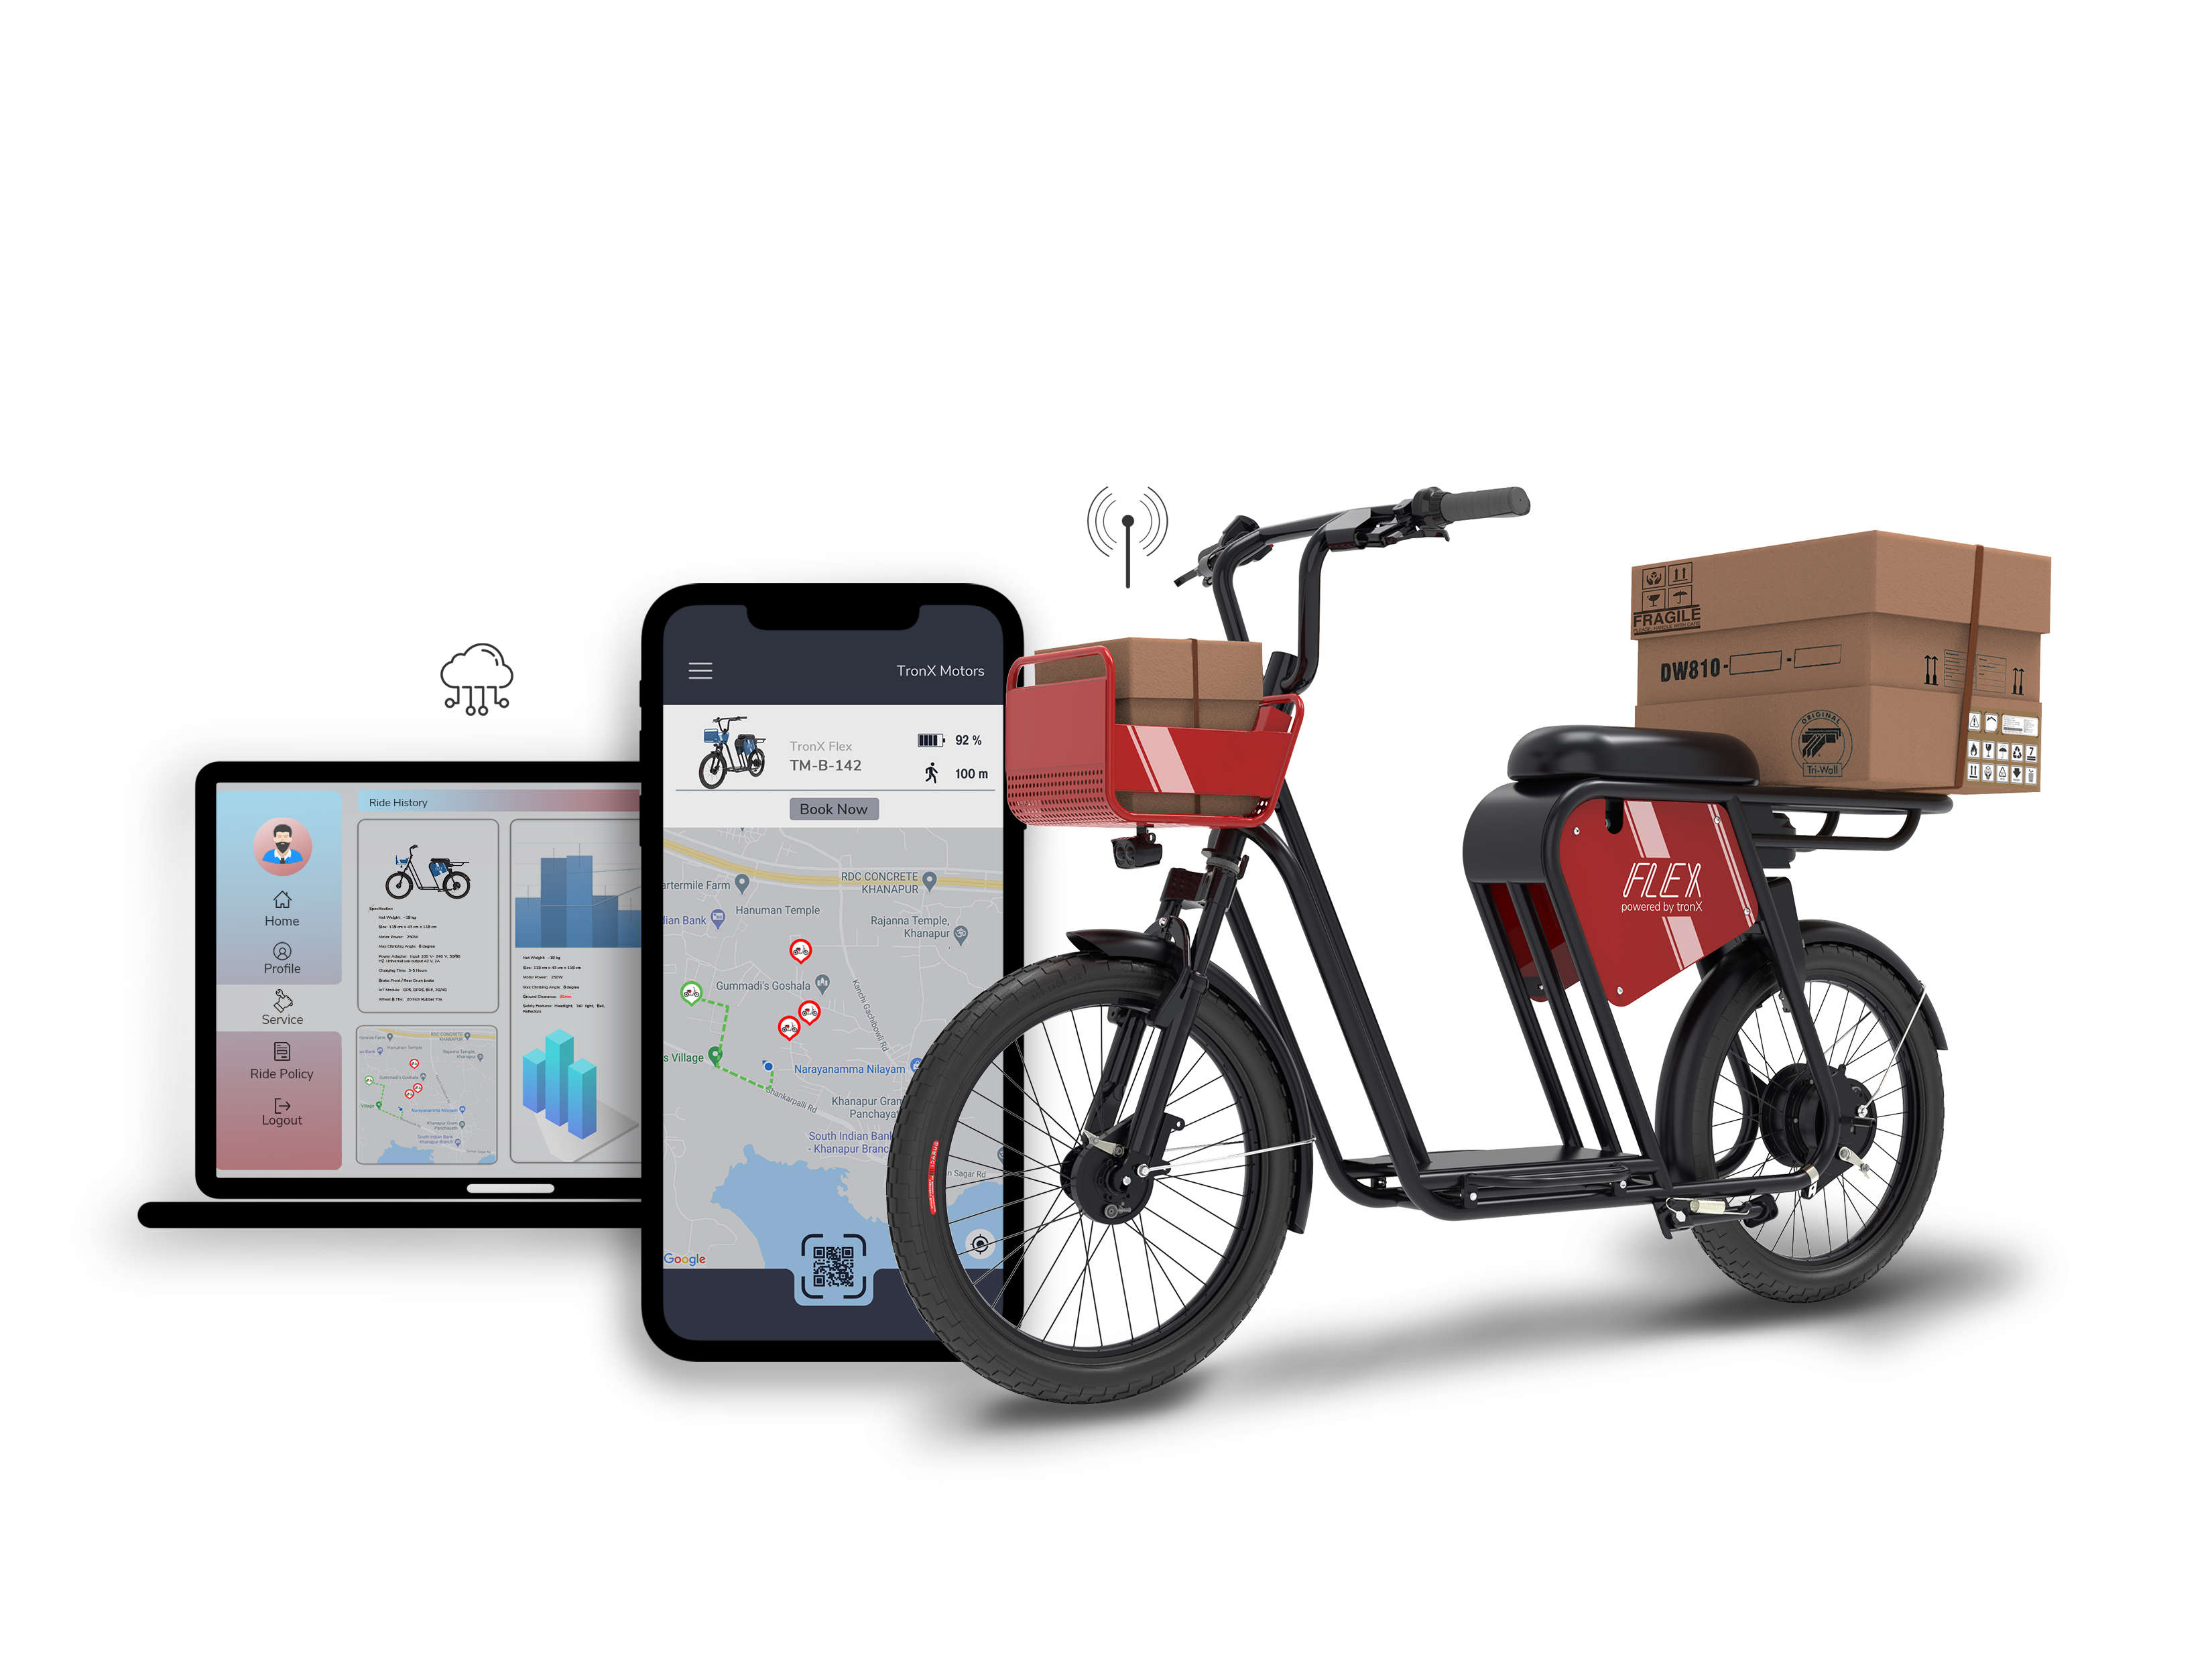 tbike flex is powered by tronX™, the native AIOT platform that enables several smart and intelligent features for fleet owners, riders and last-mile delivery operators.